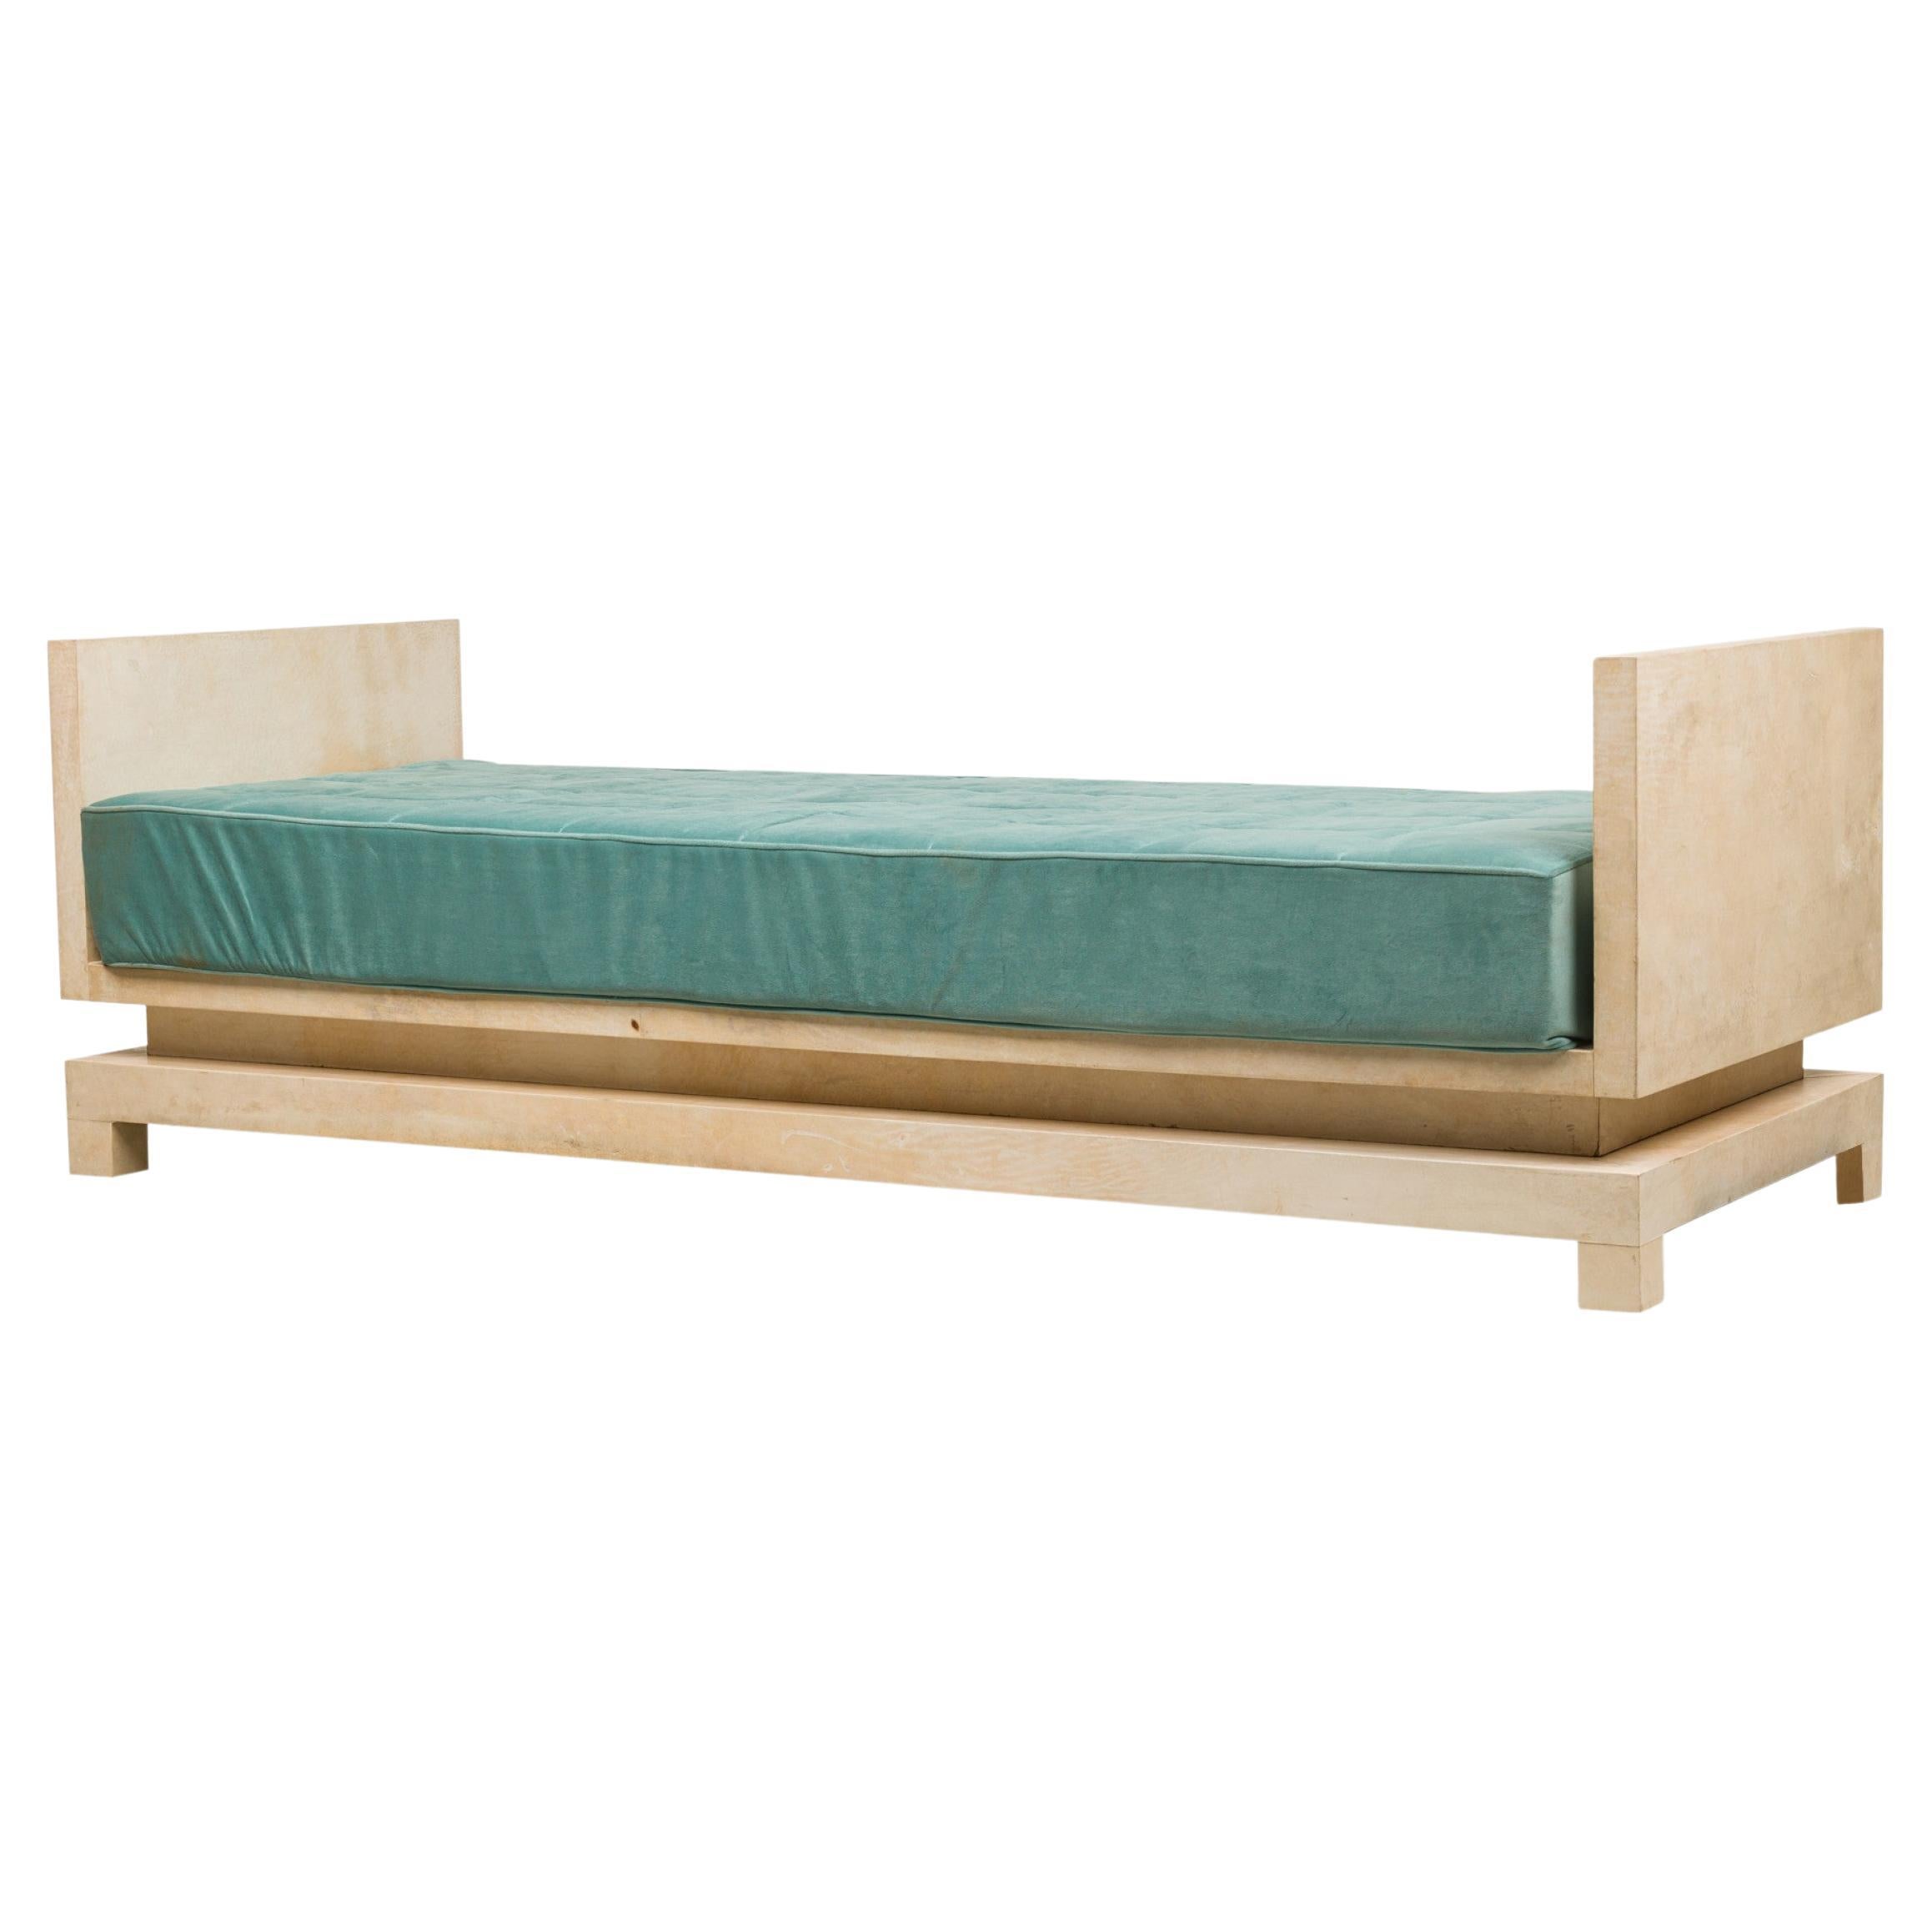 Midcentury Parchment and Teal Upholstered Daybed, Manner of Samuel Marx For Sale